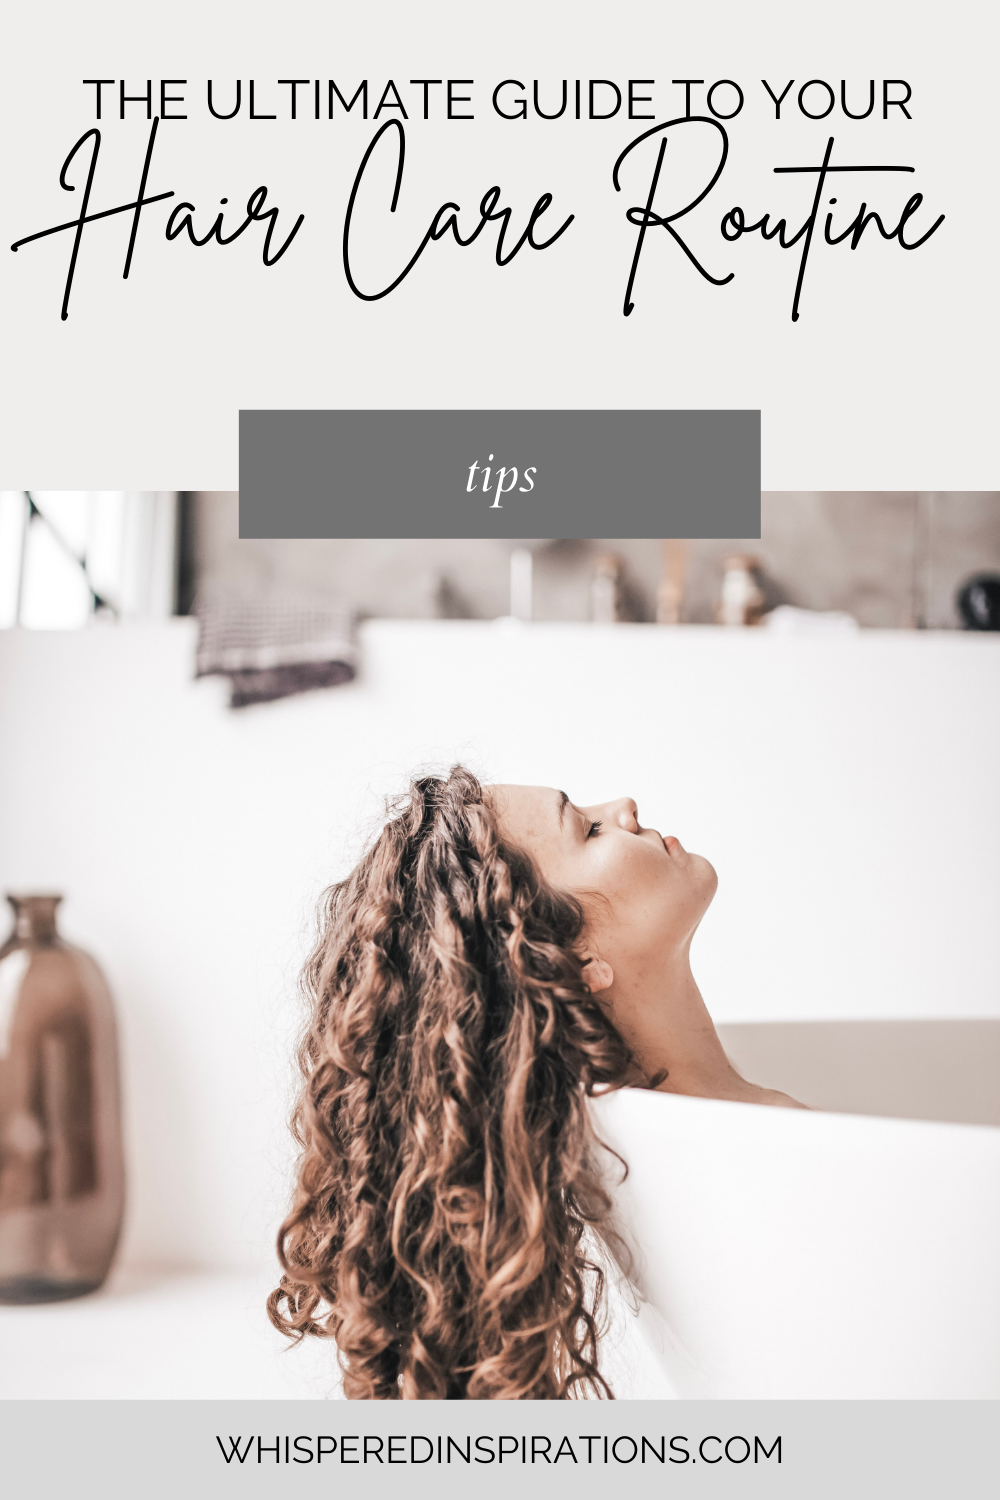 A woman is lying in her tub, eyes closed, and relaxed. Her beautiful, healthy, curly hair is hanging over the tub. This article covers the ultimate guide to your hair care routine.